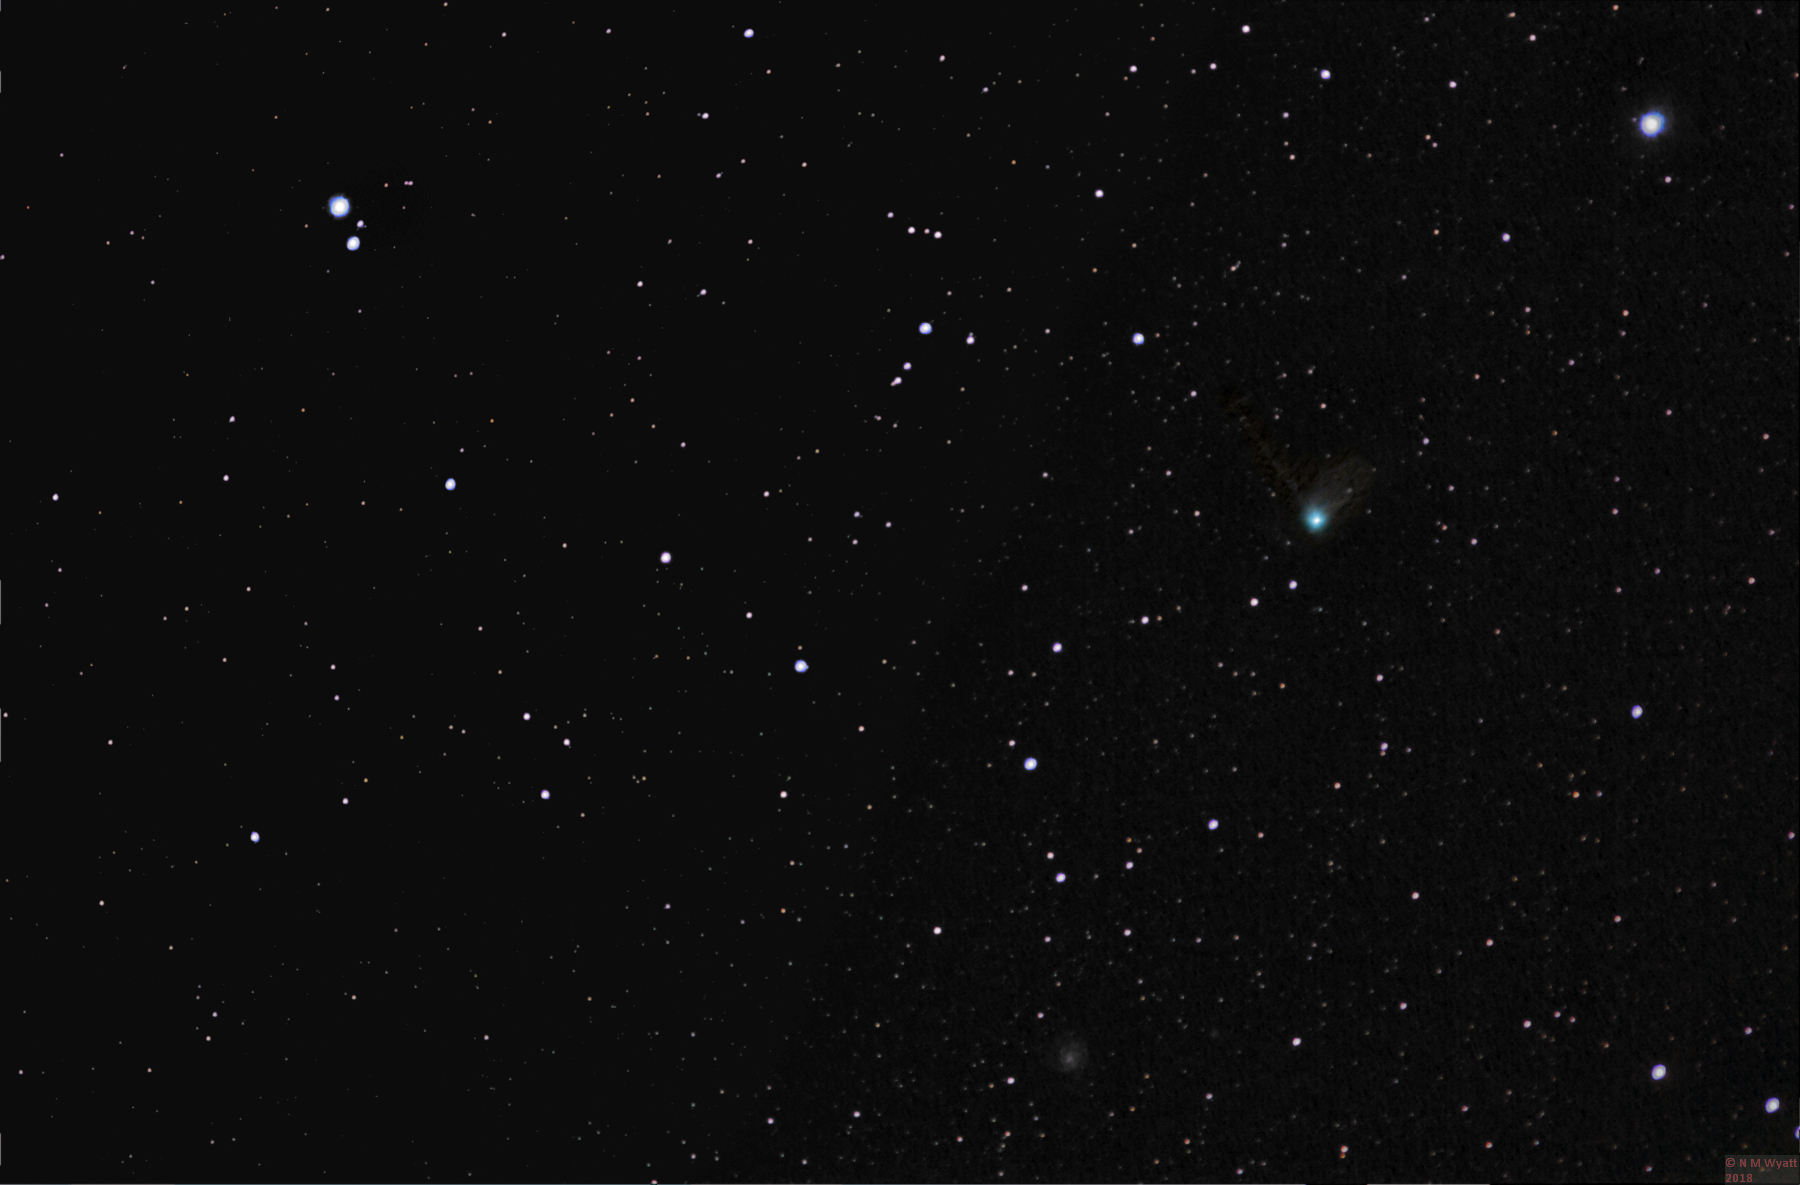 Comet Catalina, with Mizar, Alkaid and the galaxy M110